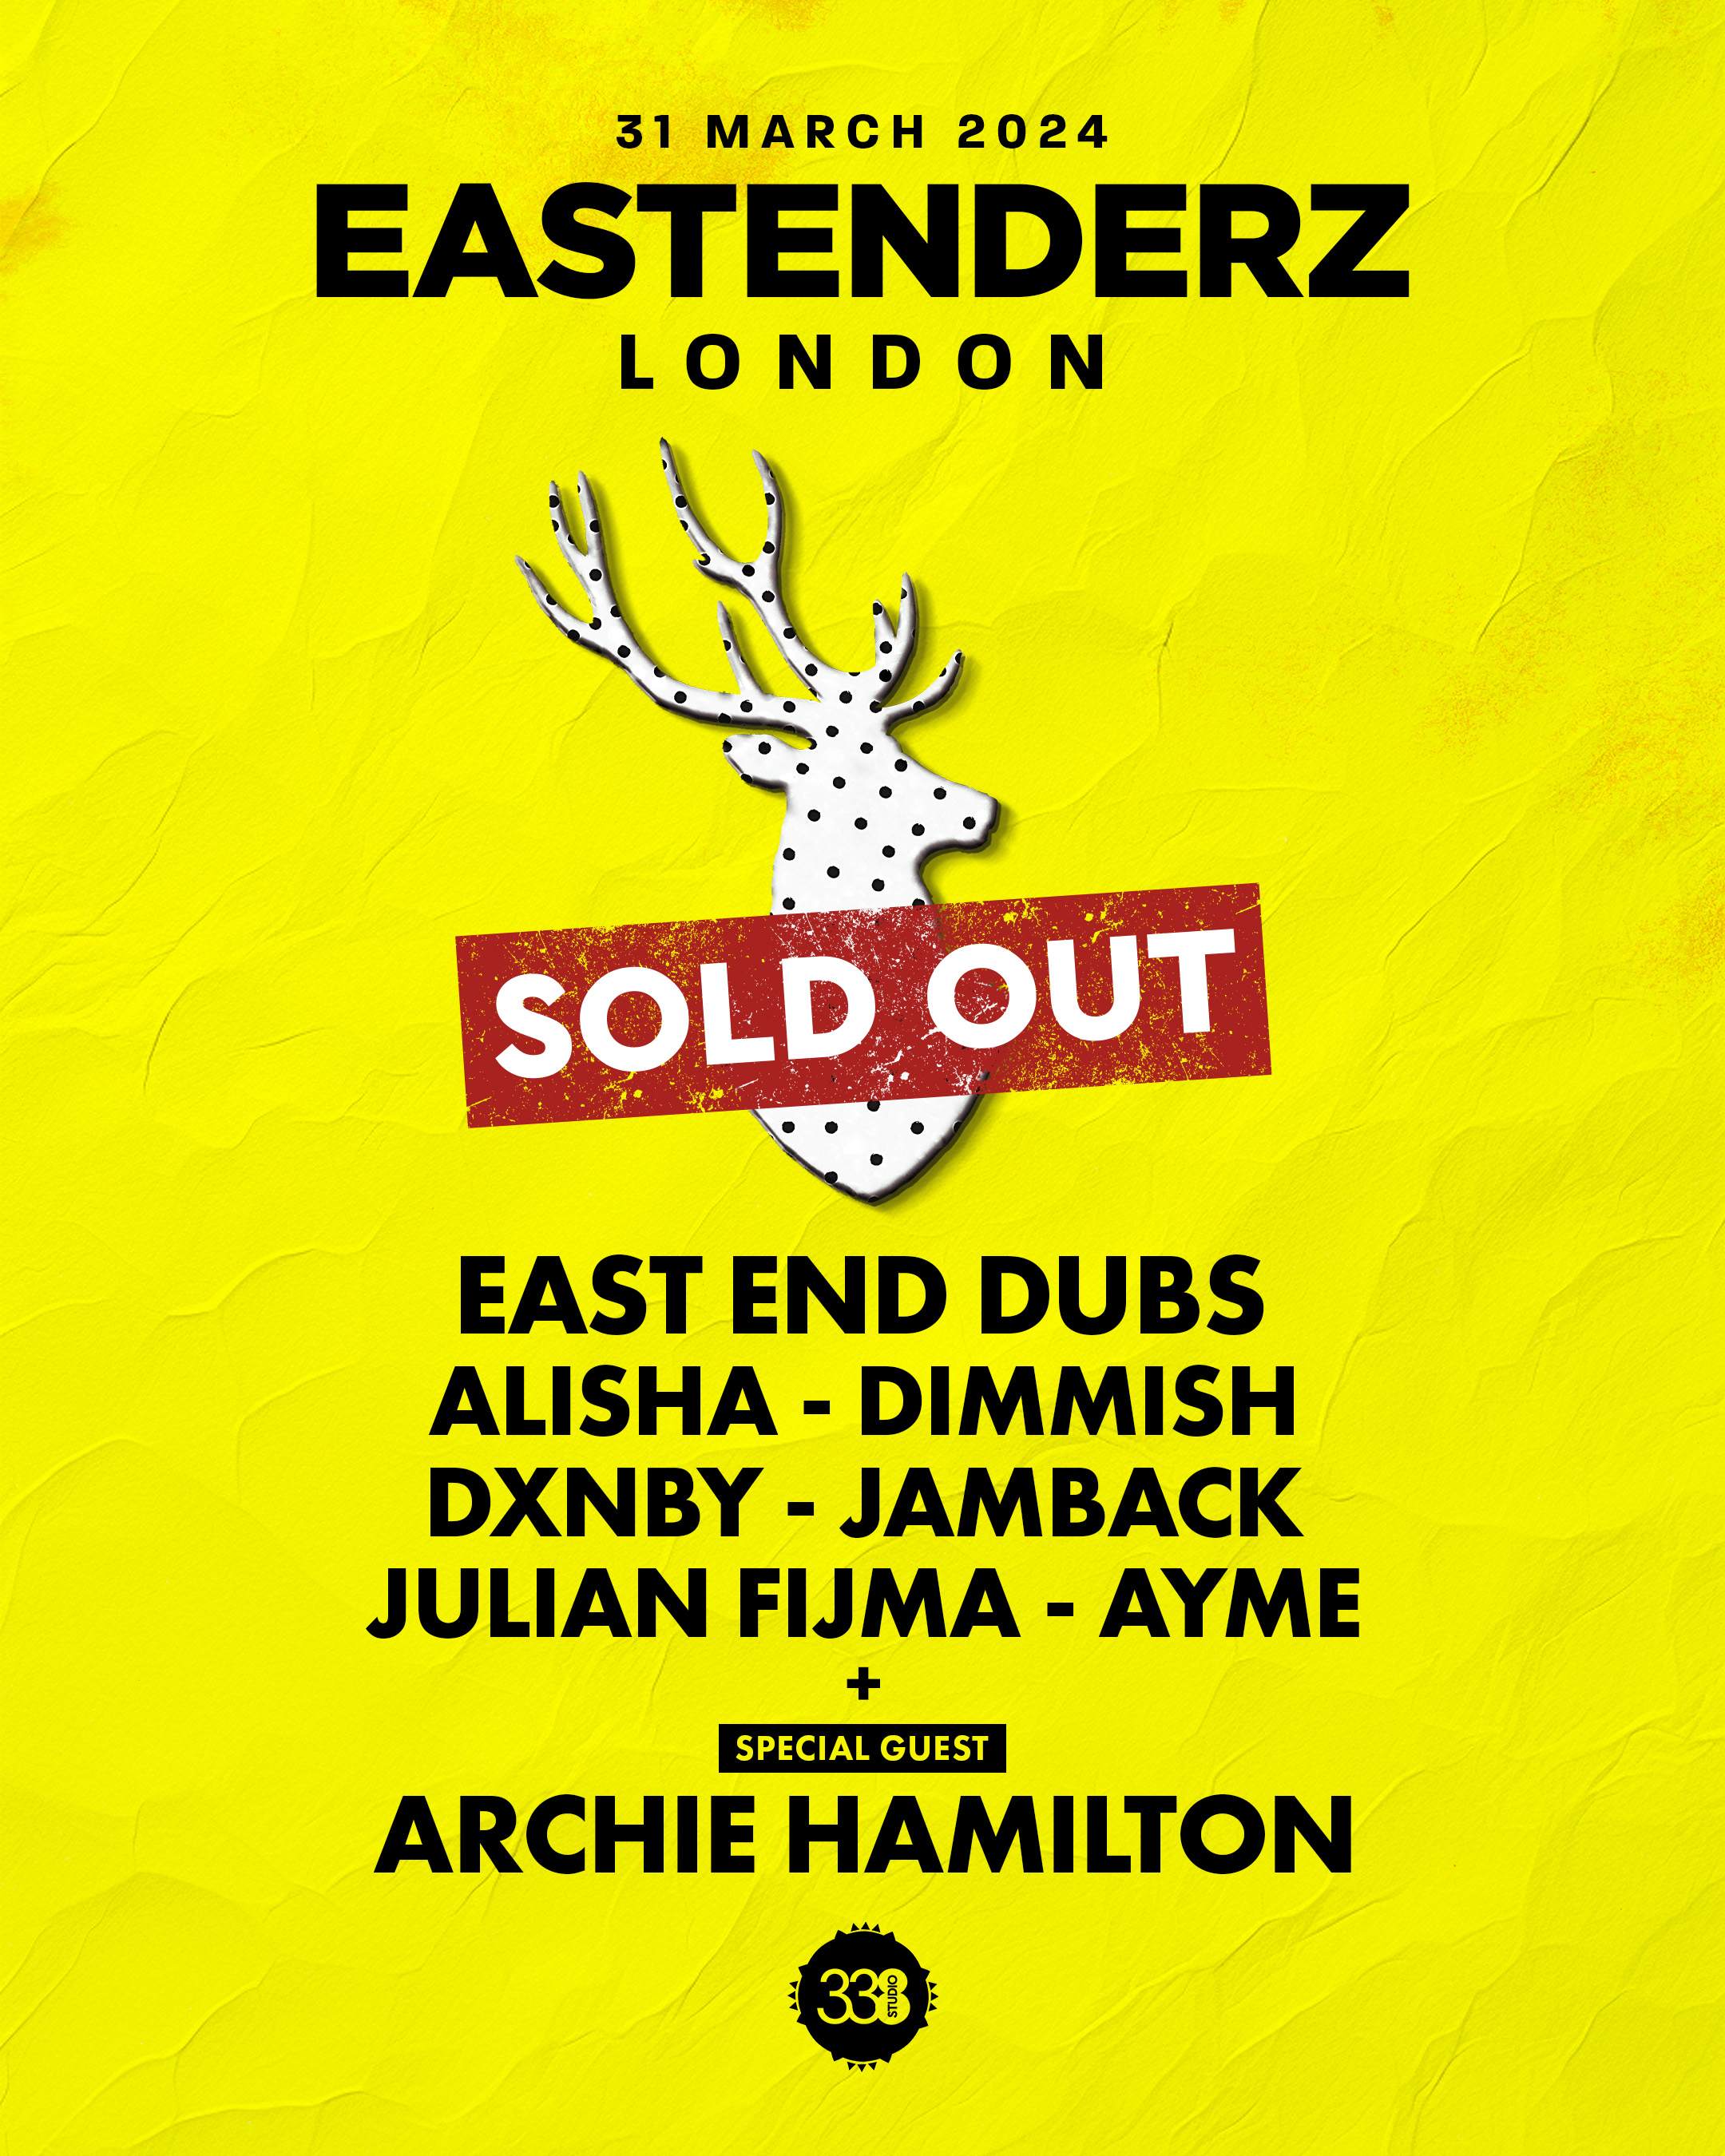 Eastenderz London Easter Rave [SOLD OUT] - フライヤー表